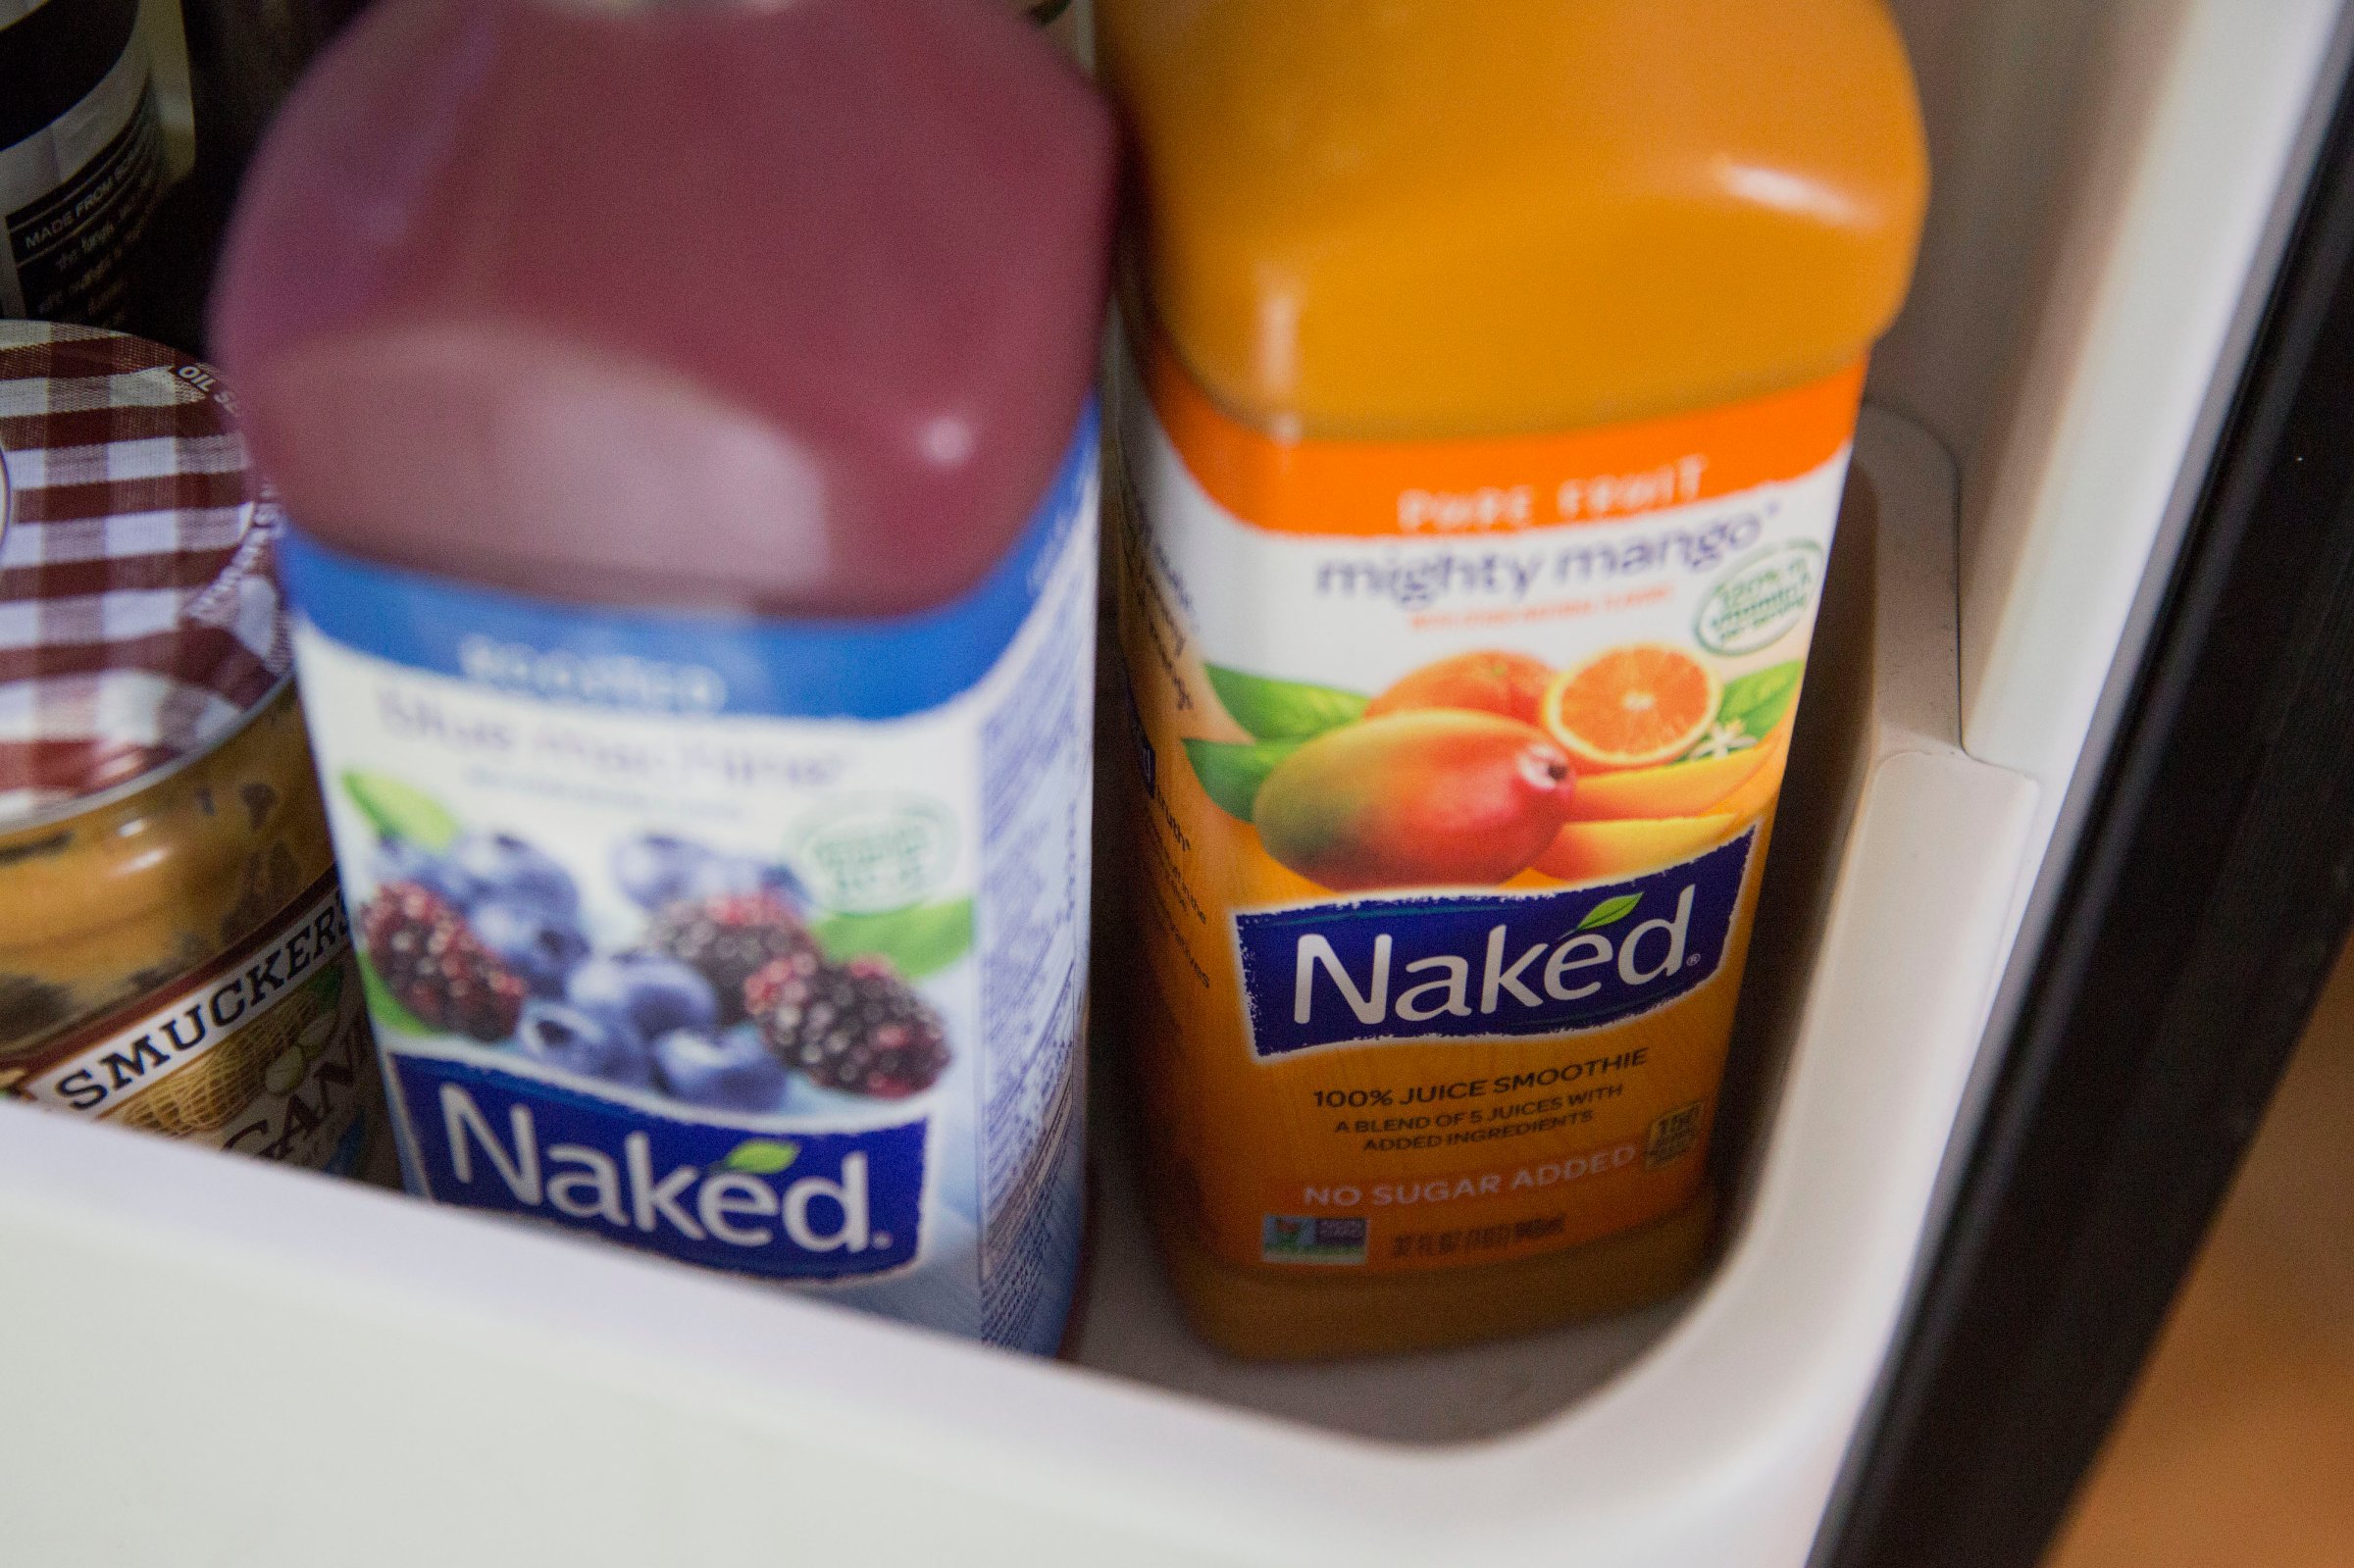 Bottles of PepsiCo Inc. Naked brand juice smoothies are arranged for a photograph in Tiskilwa, Illinois, U.S., on Thursday, July 2, 2015. PepsiCo Inc. is expected to report quarterly earnings on July 9, 2015.